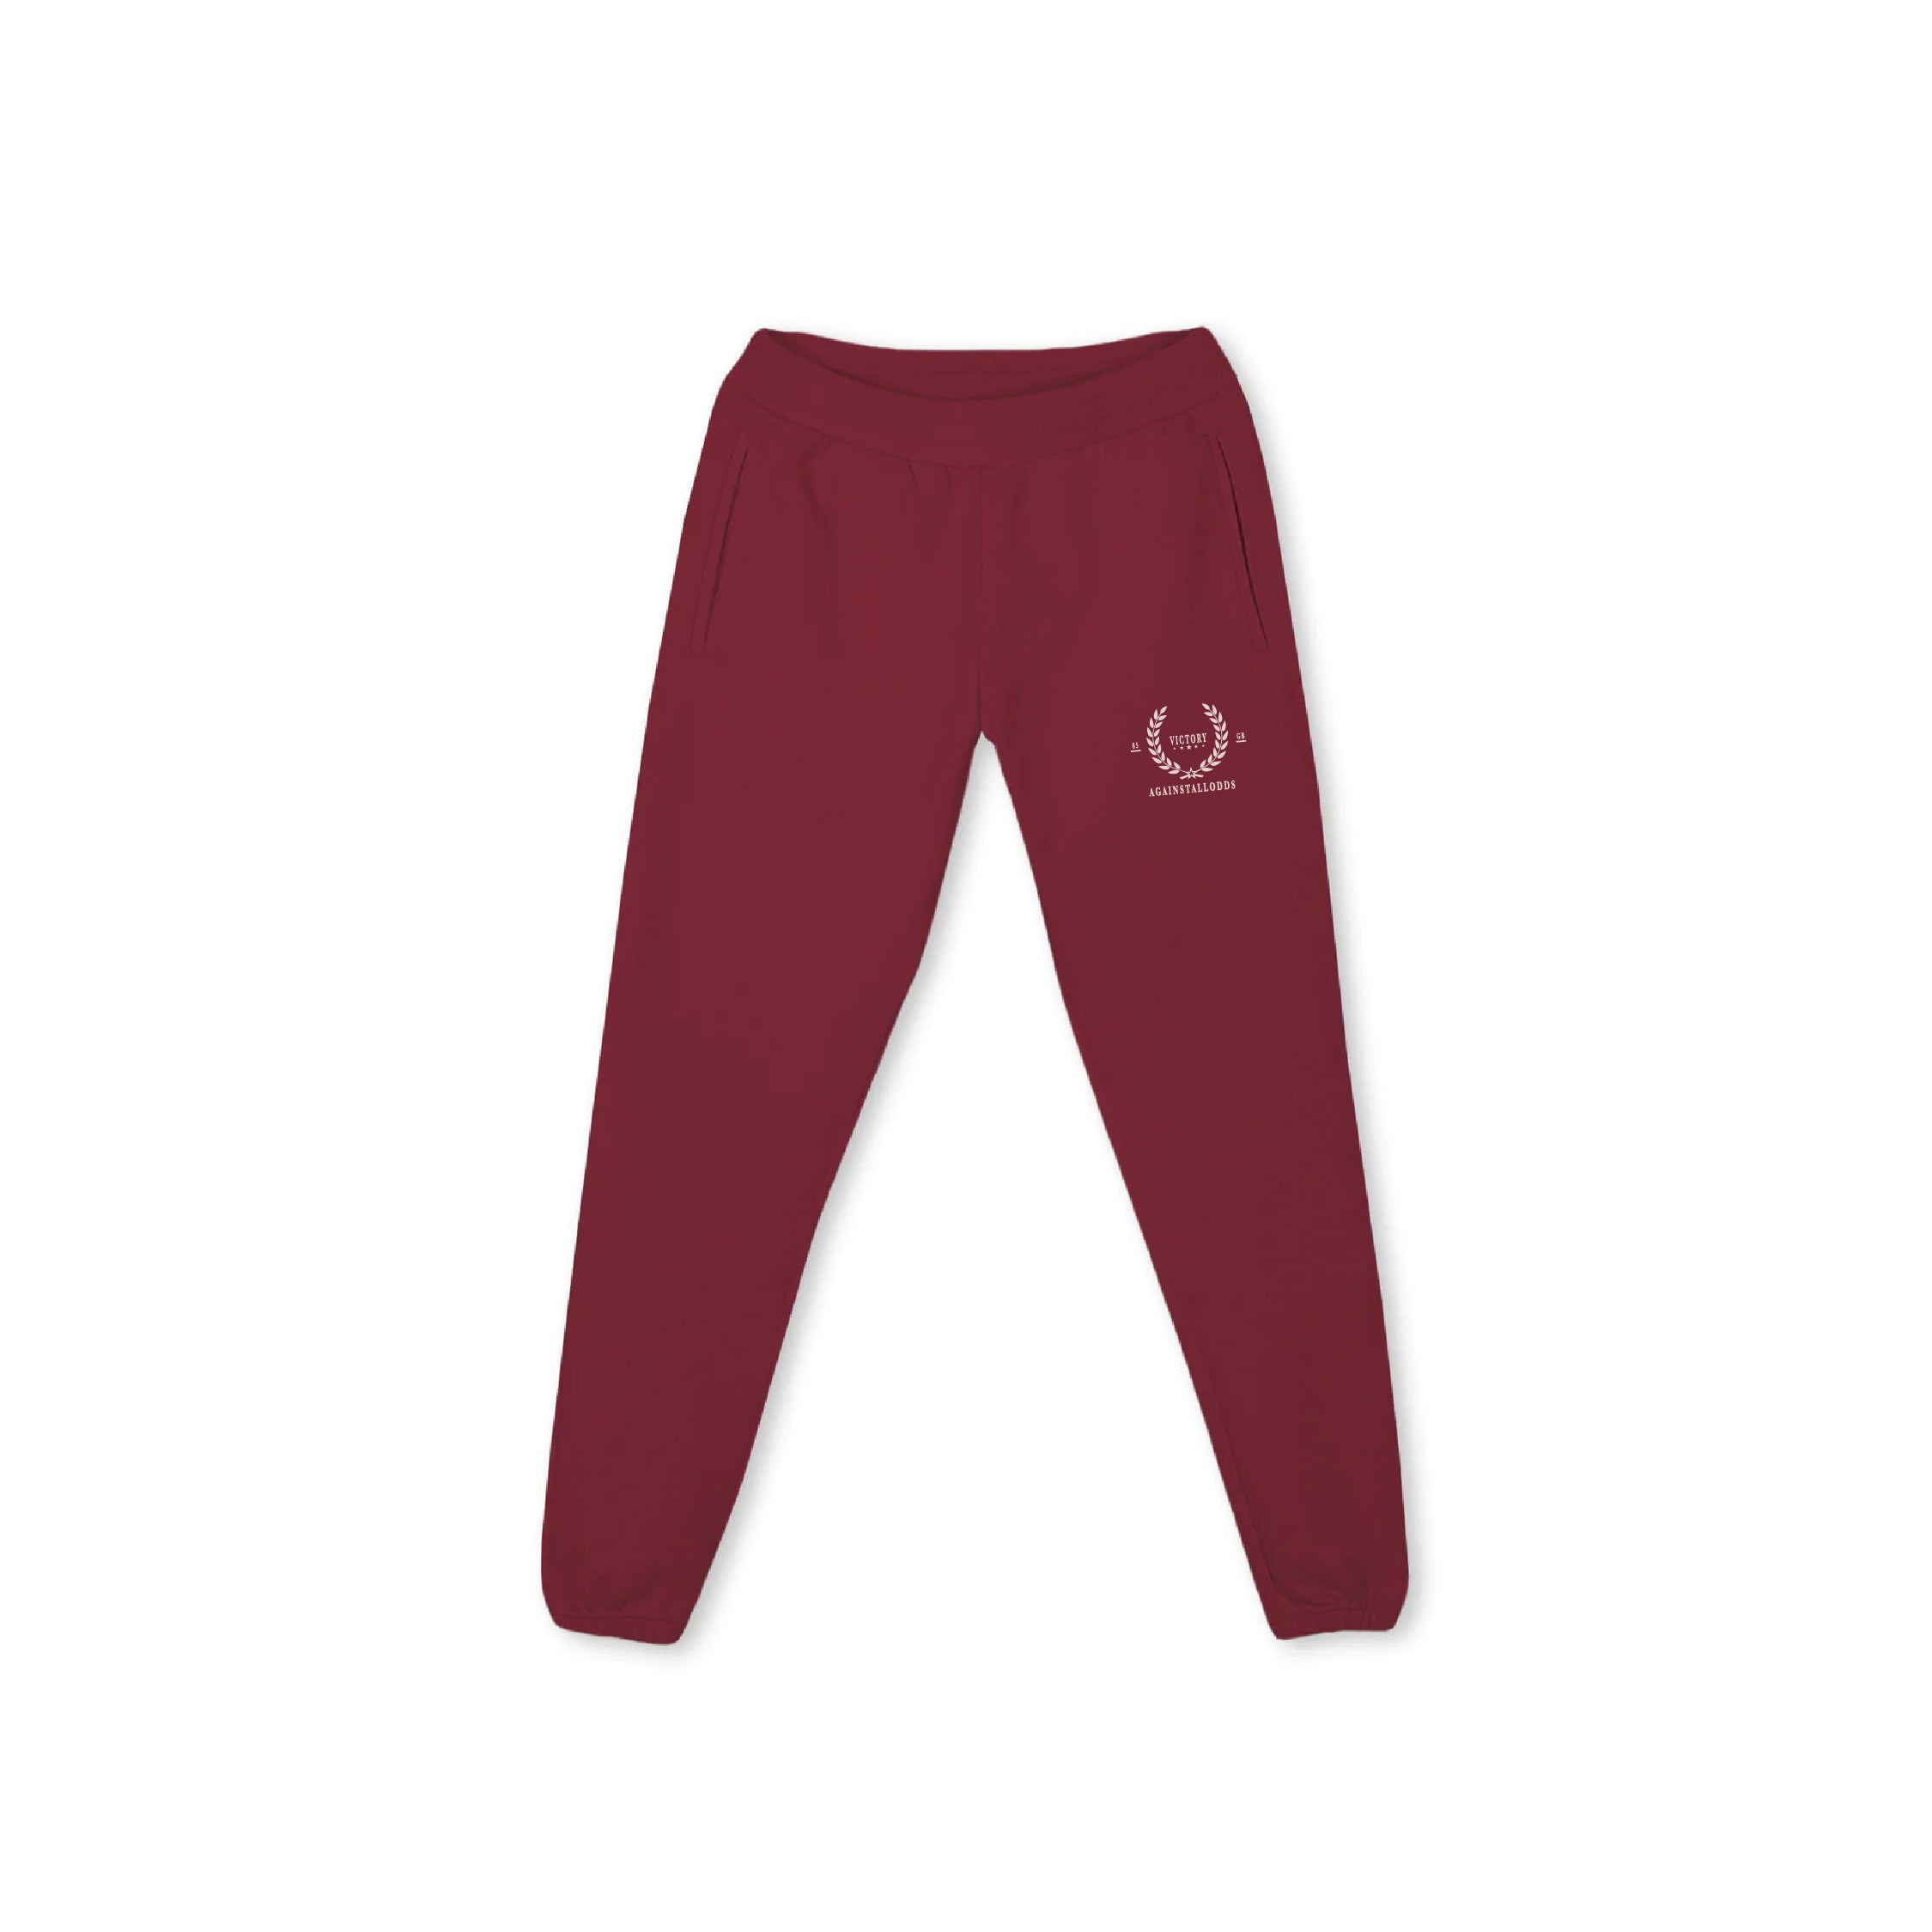 ESTATE OF MIND FRENCH TERRY SWEATPANTS - VICTORY - BURGUNDY